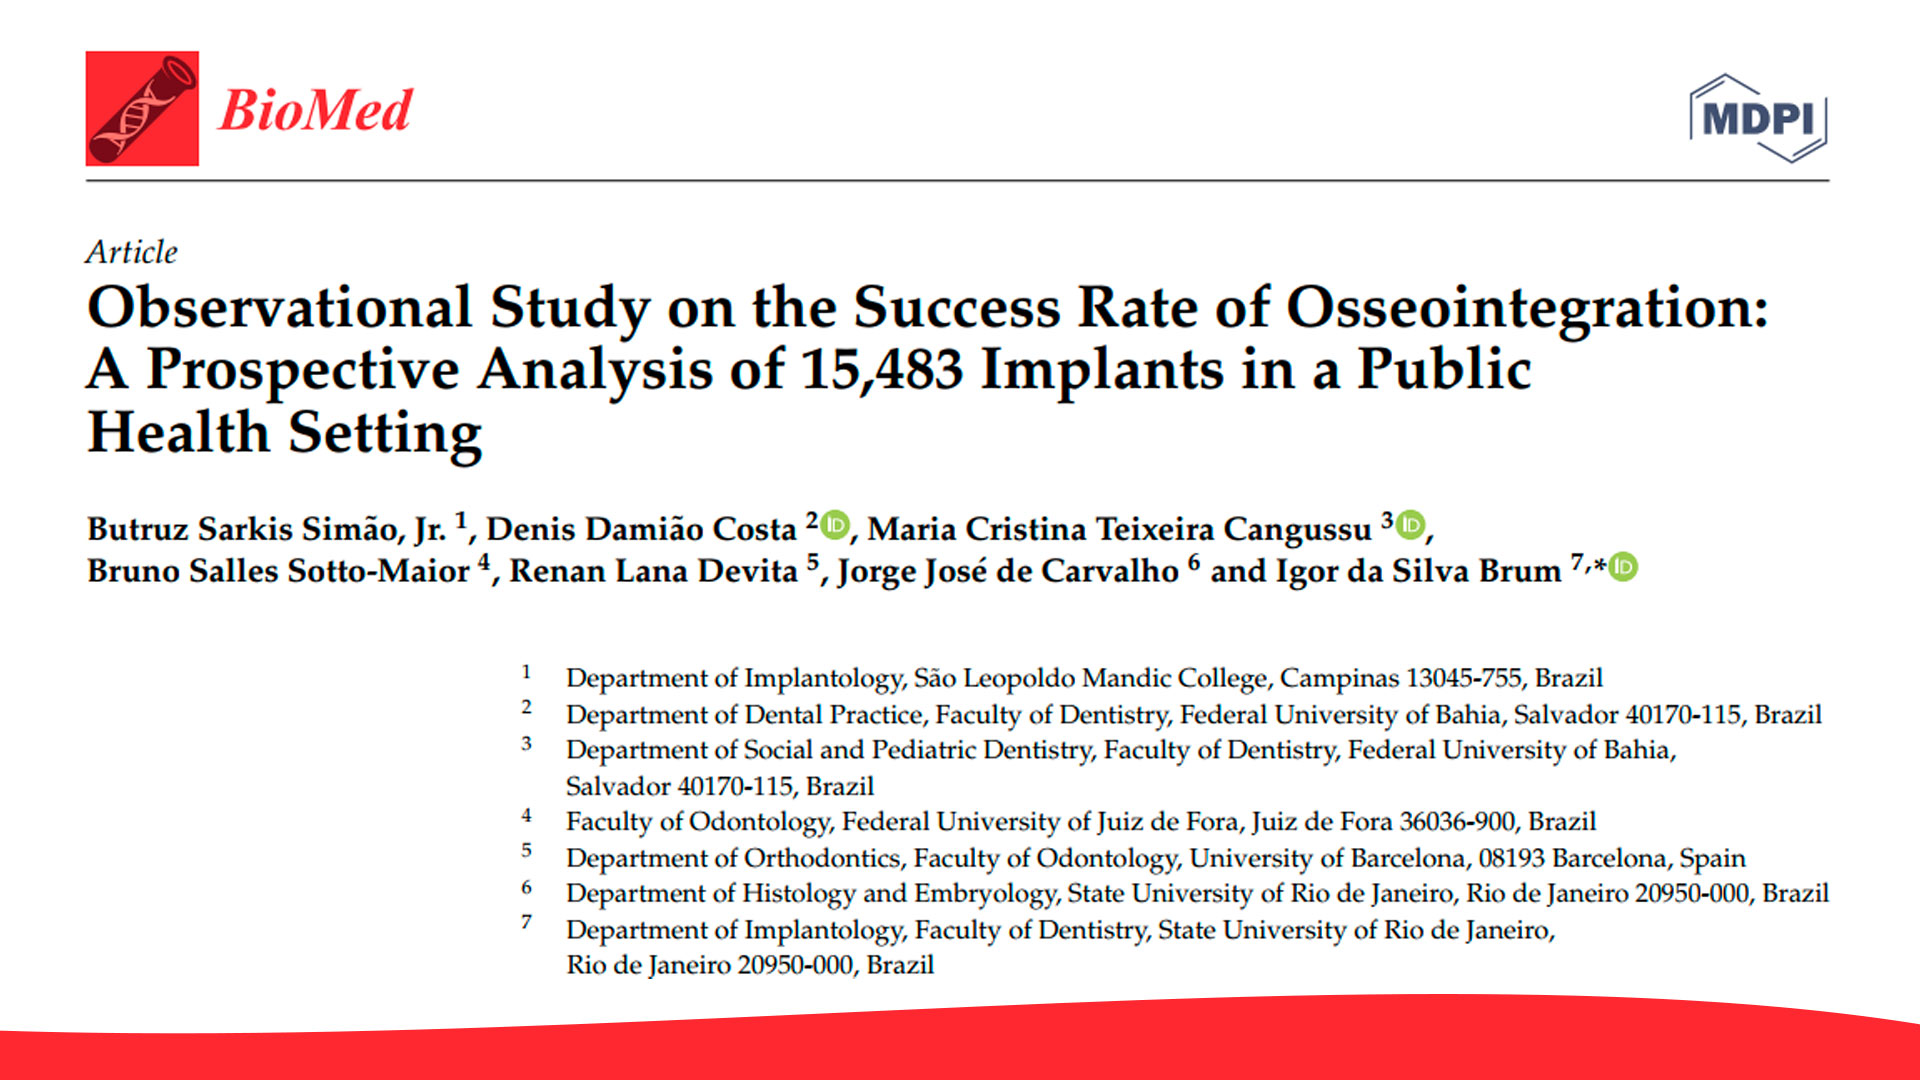 Observational-Study-on-the-Success-Rate-of-Osseointegration-Systhex-Implantes